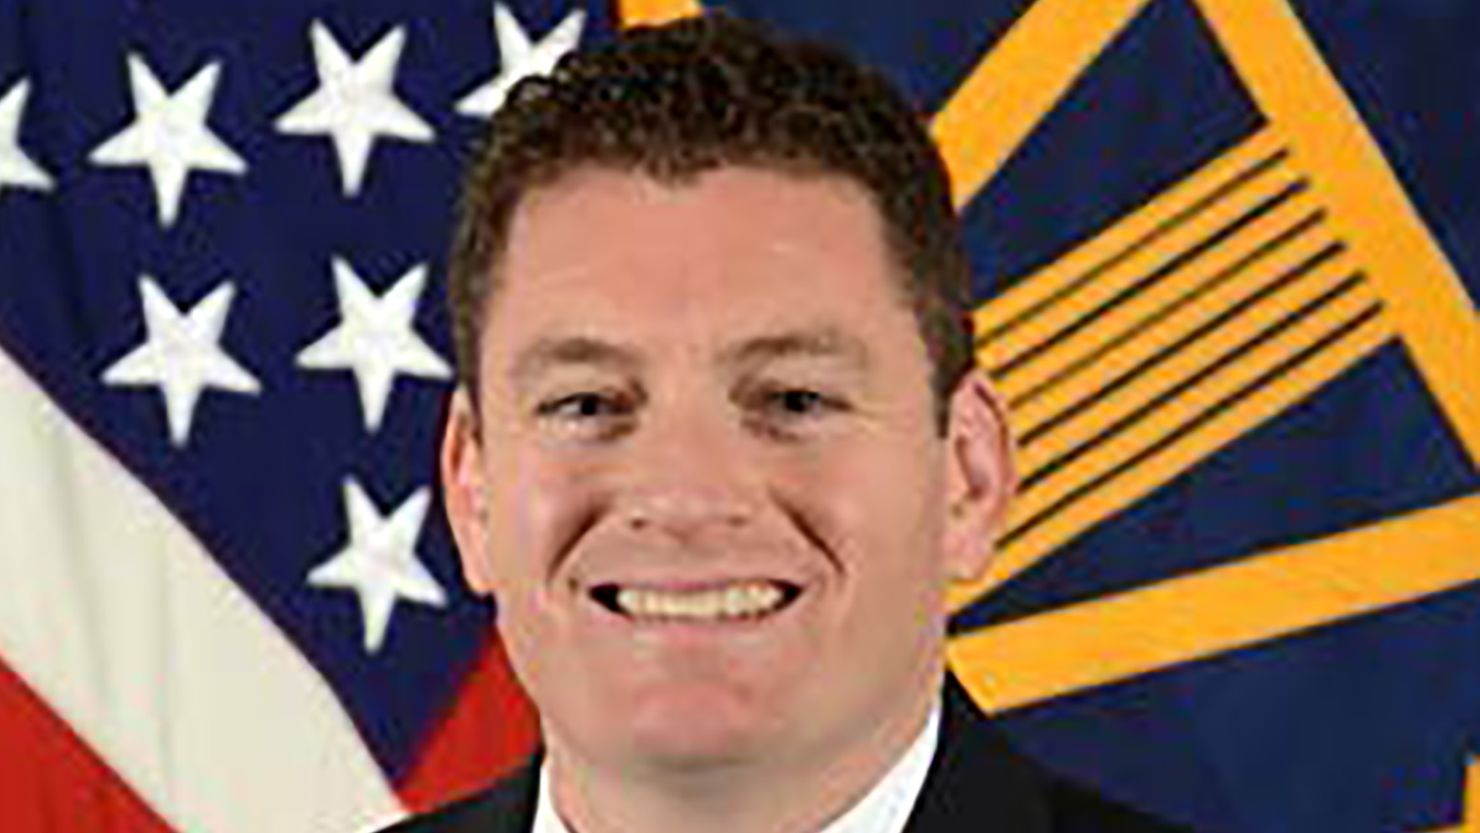 Christopher Maier, the top Pentagon official leading the Defeat-ISIS Task Force, resigned Monday, according to the Pentagon.